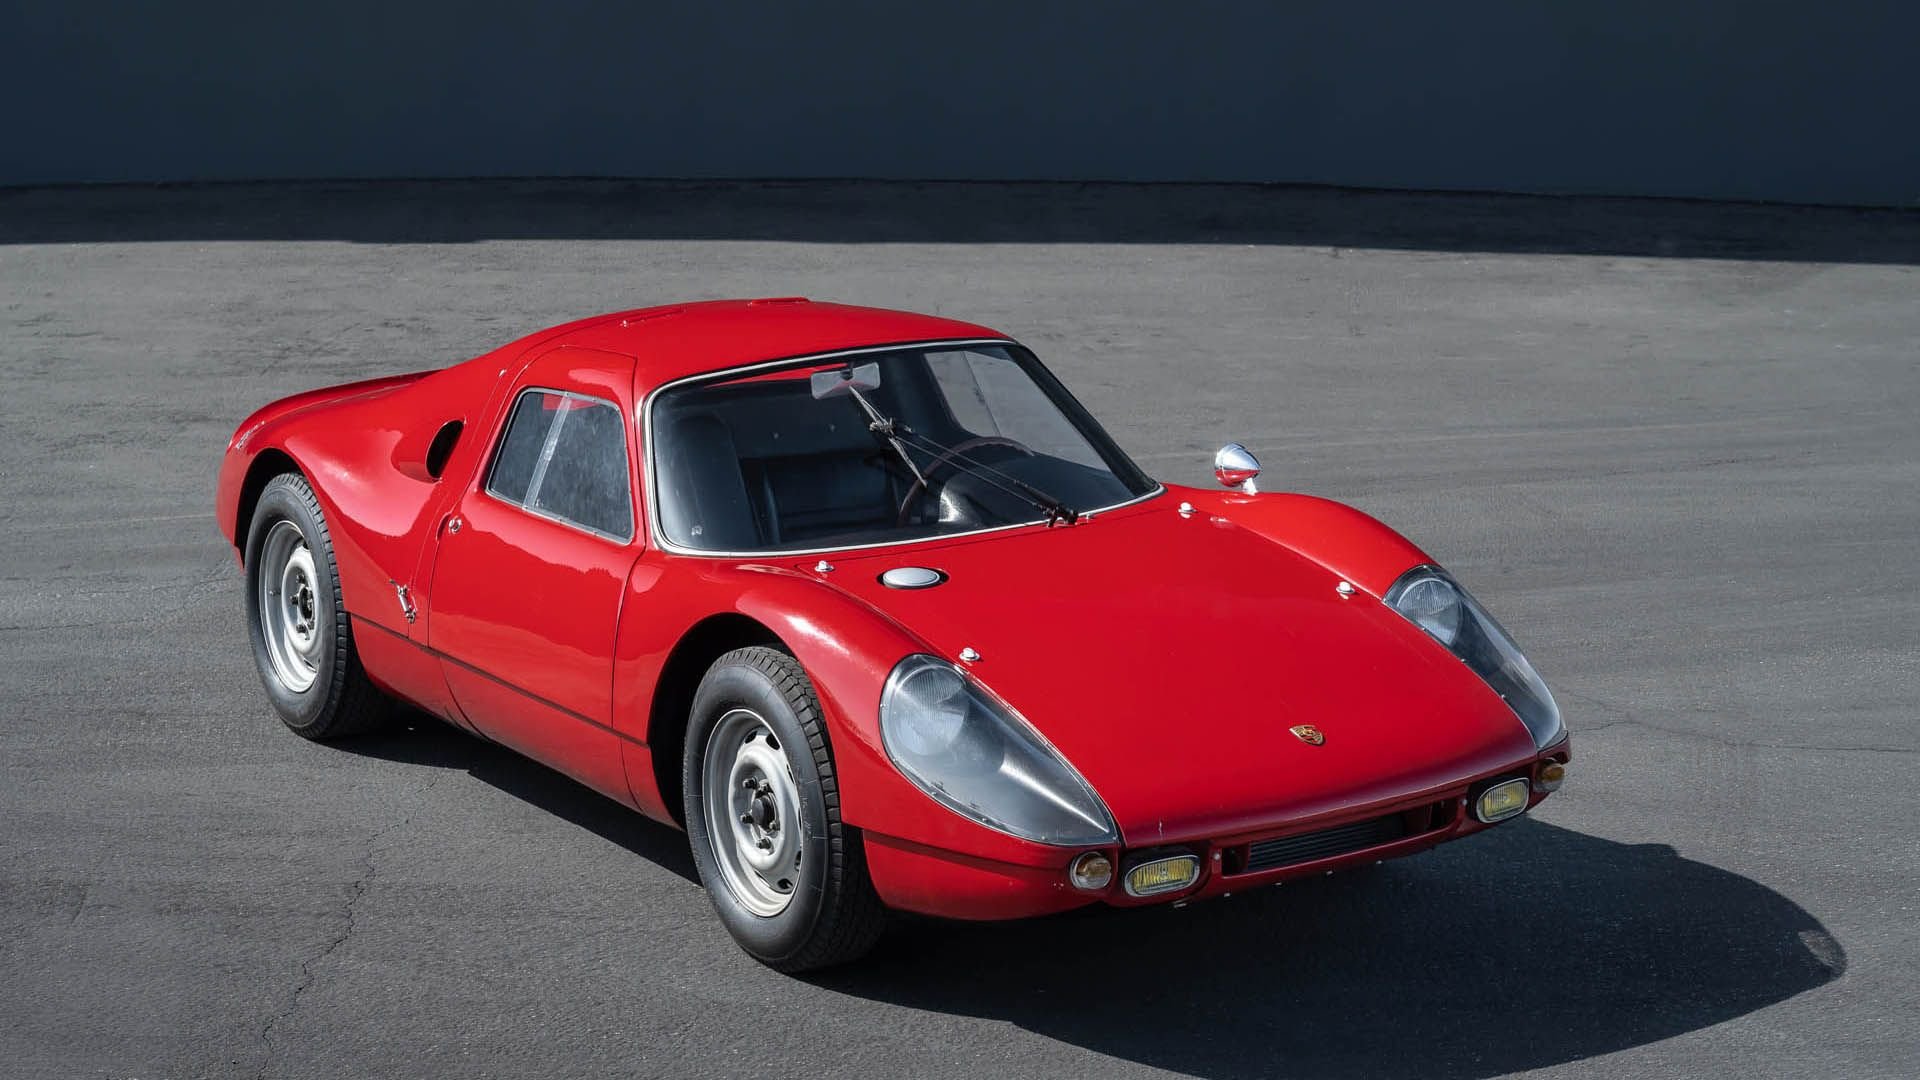 Top-angled view of a red 1964 Porsche 904 Carrera GTS